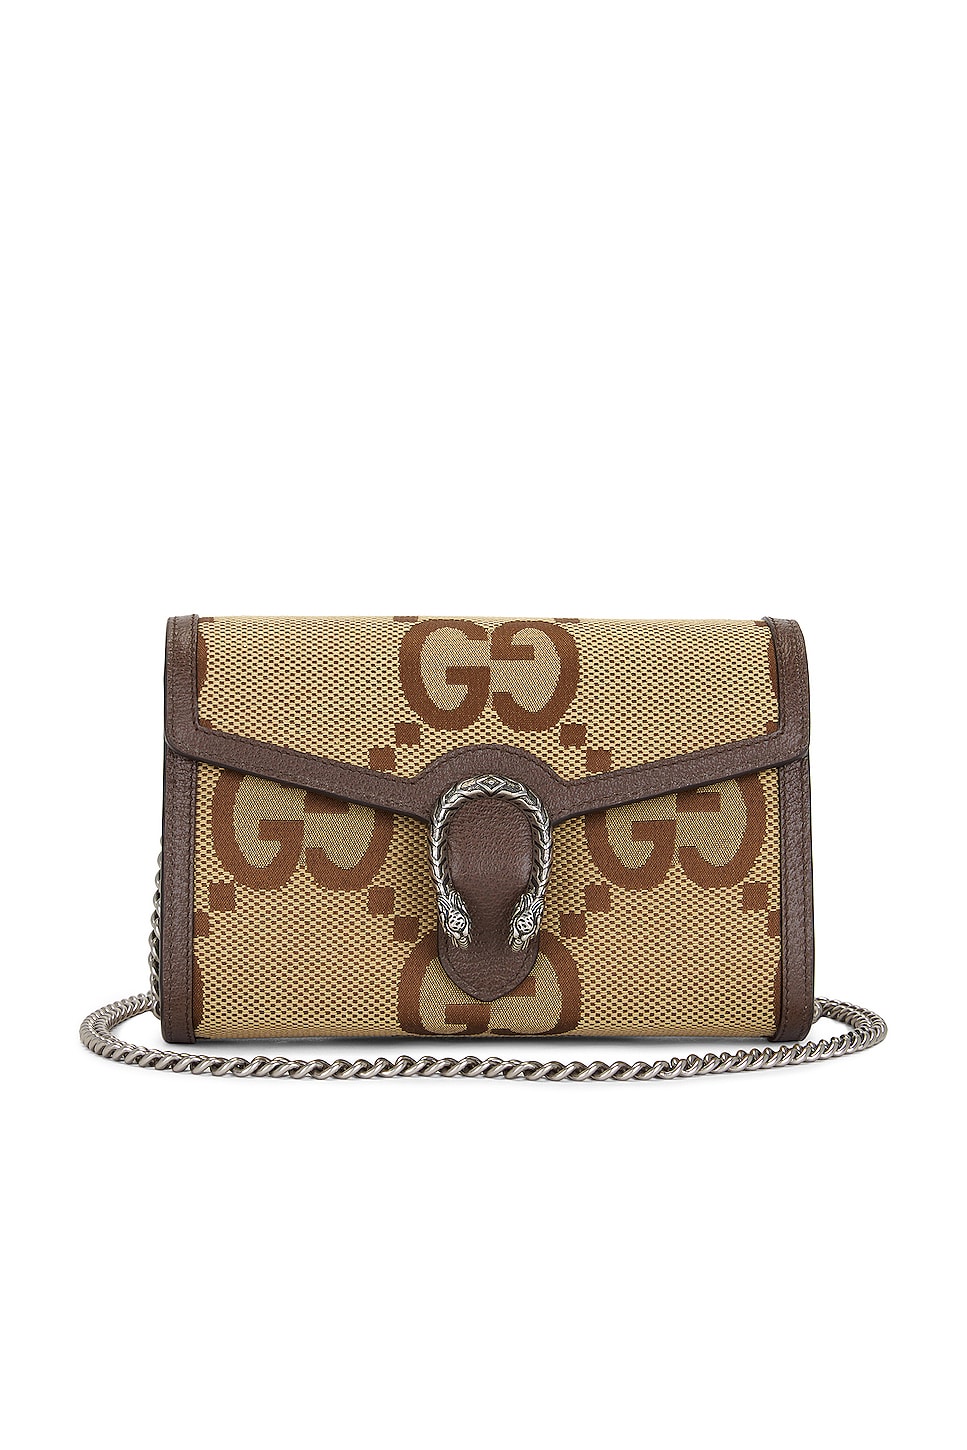 Five Things You Need To Know About The Gucci Marmont Bag! Review - Fashion  For Lunch